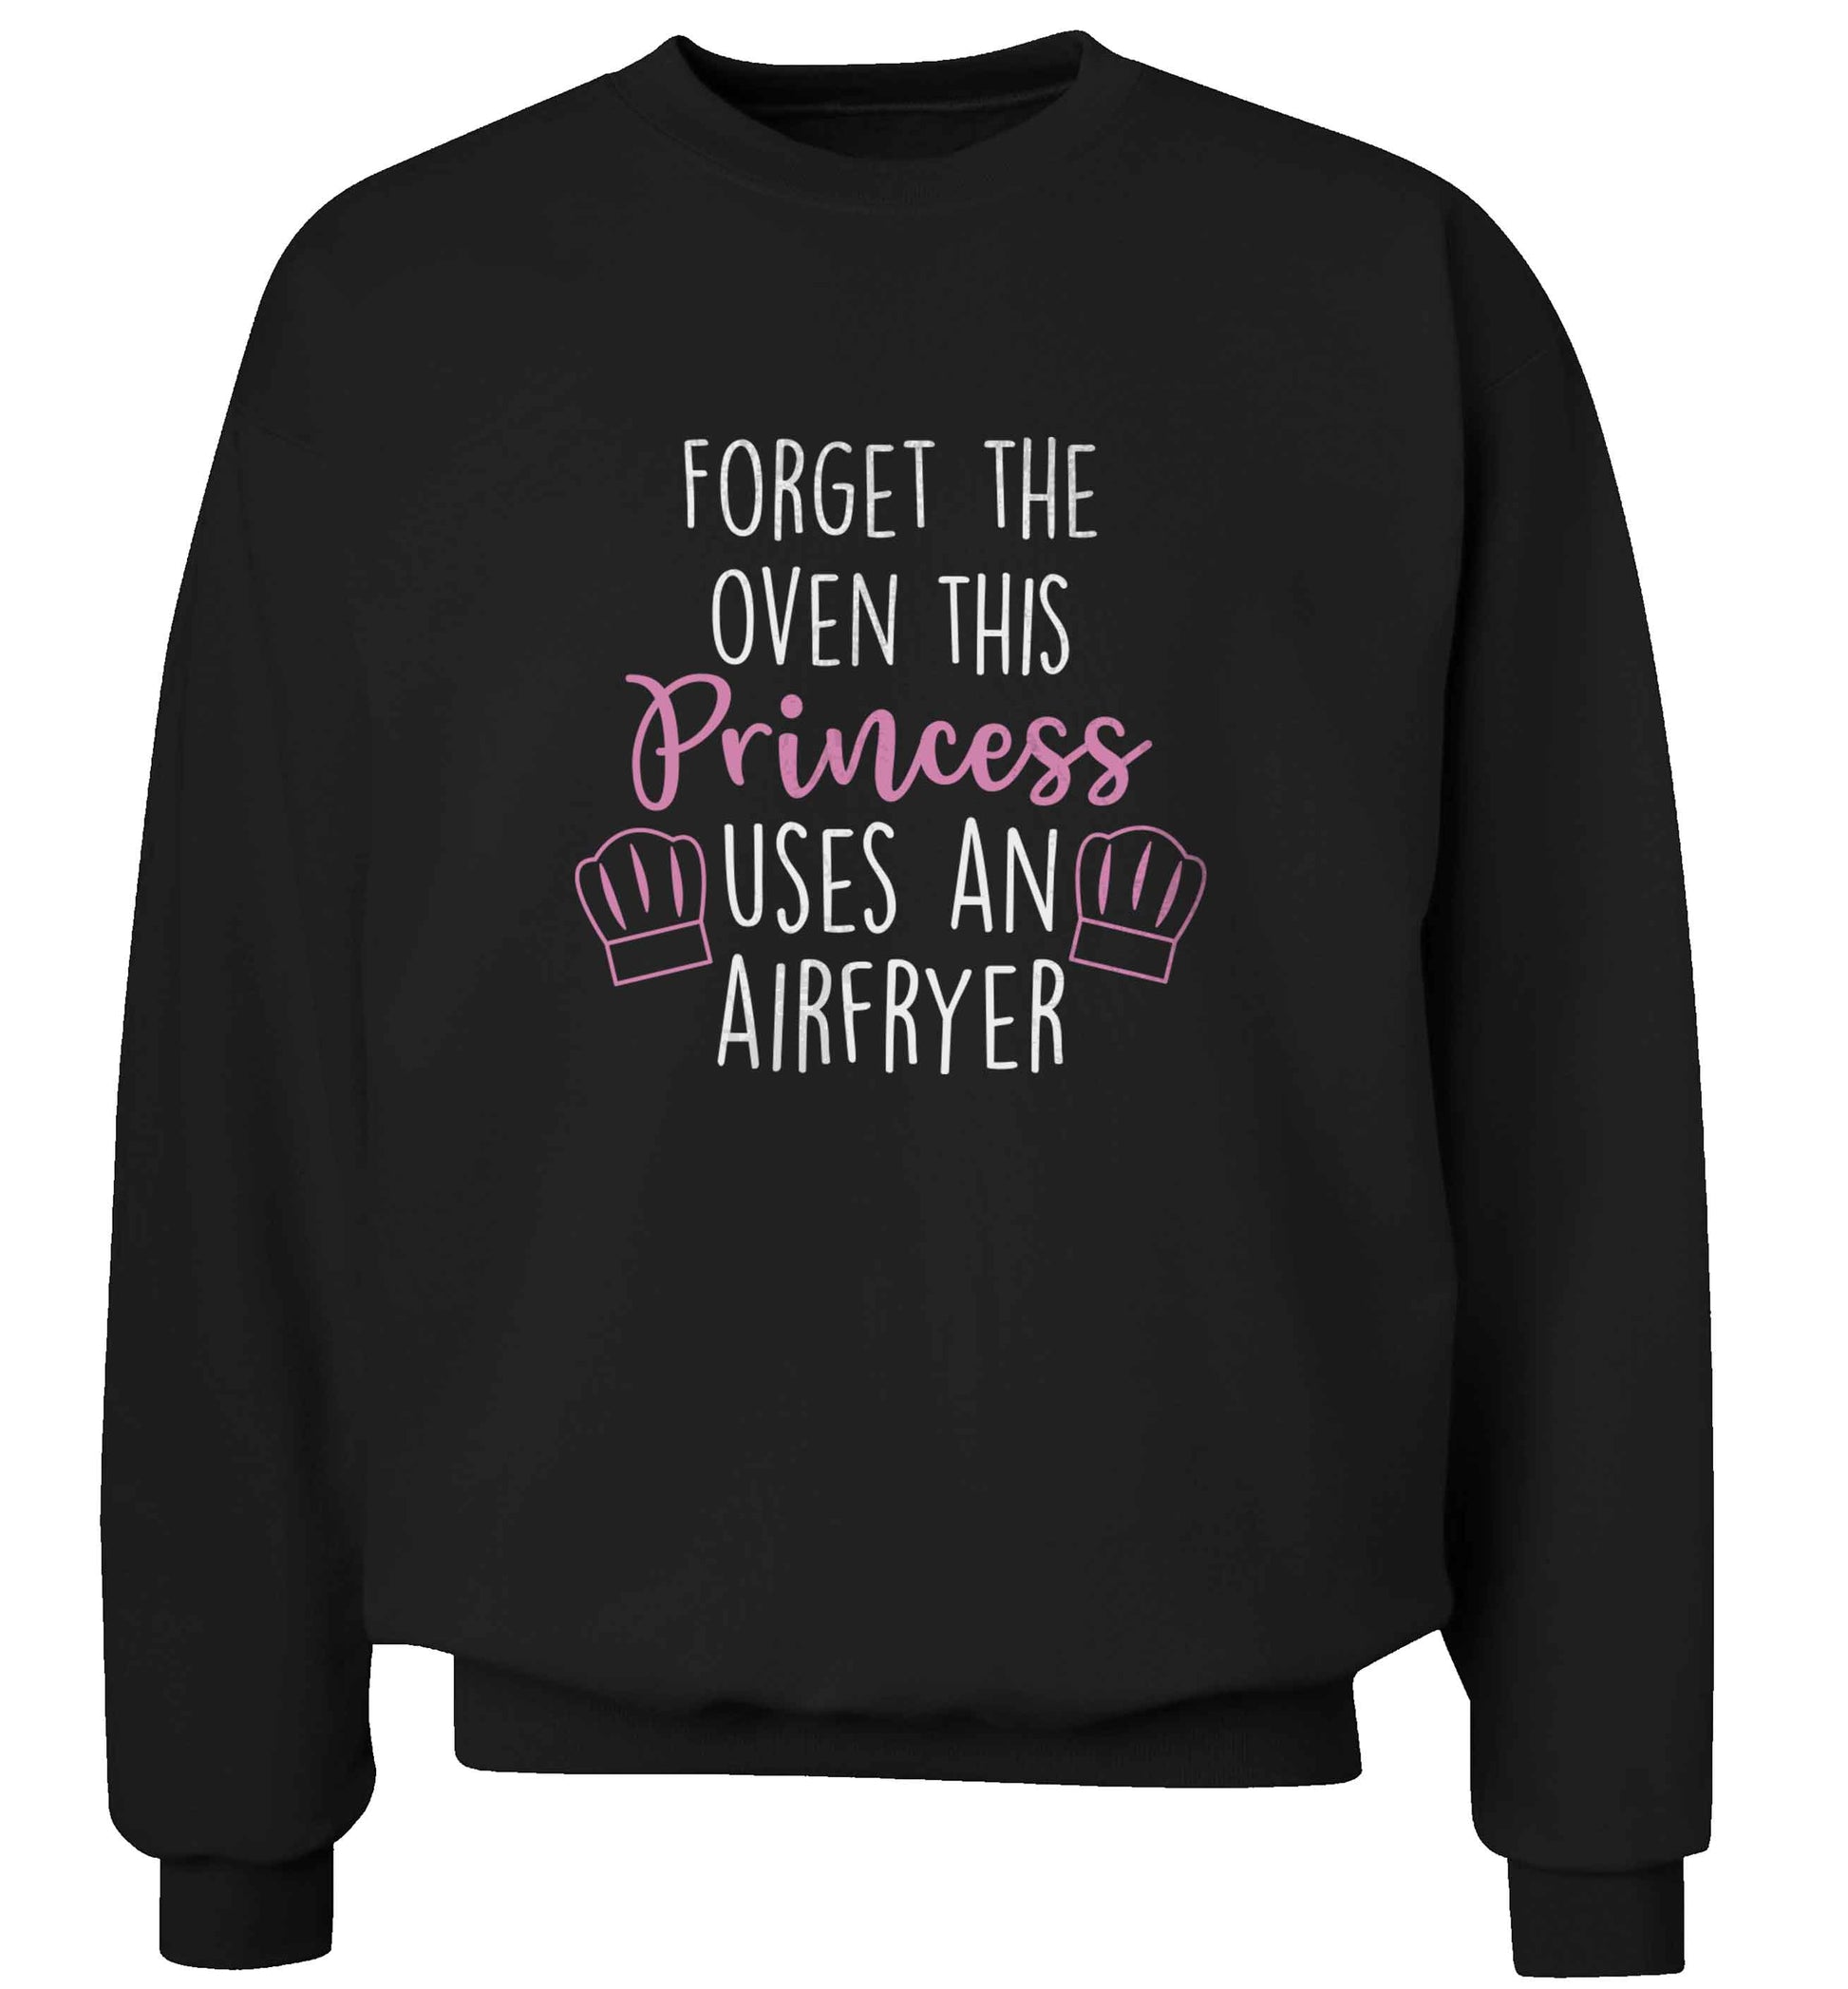 Forget the oven this princess uses an airfryeradult's unisex black sweater 2XL